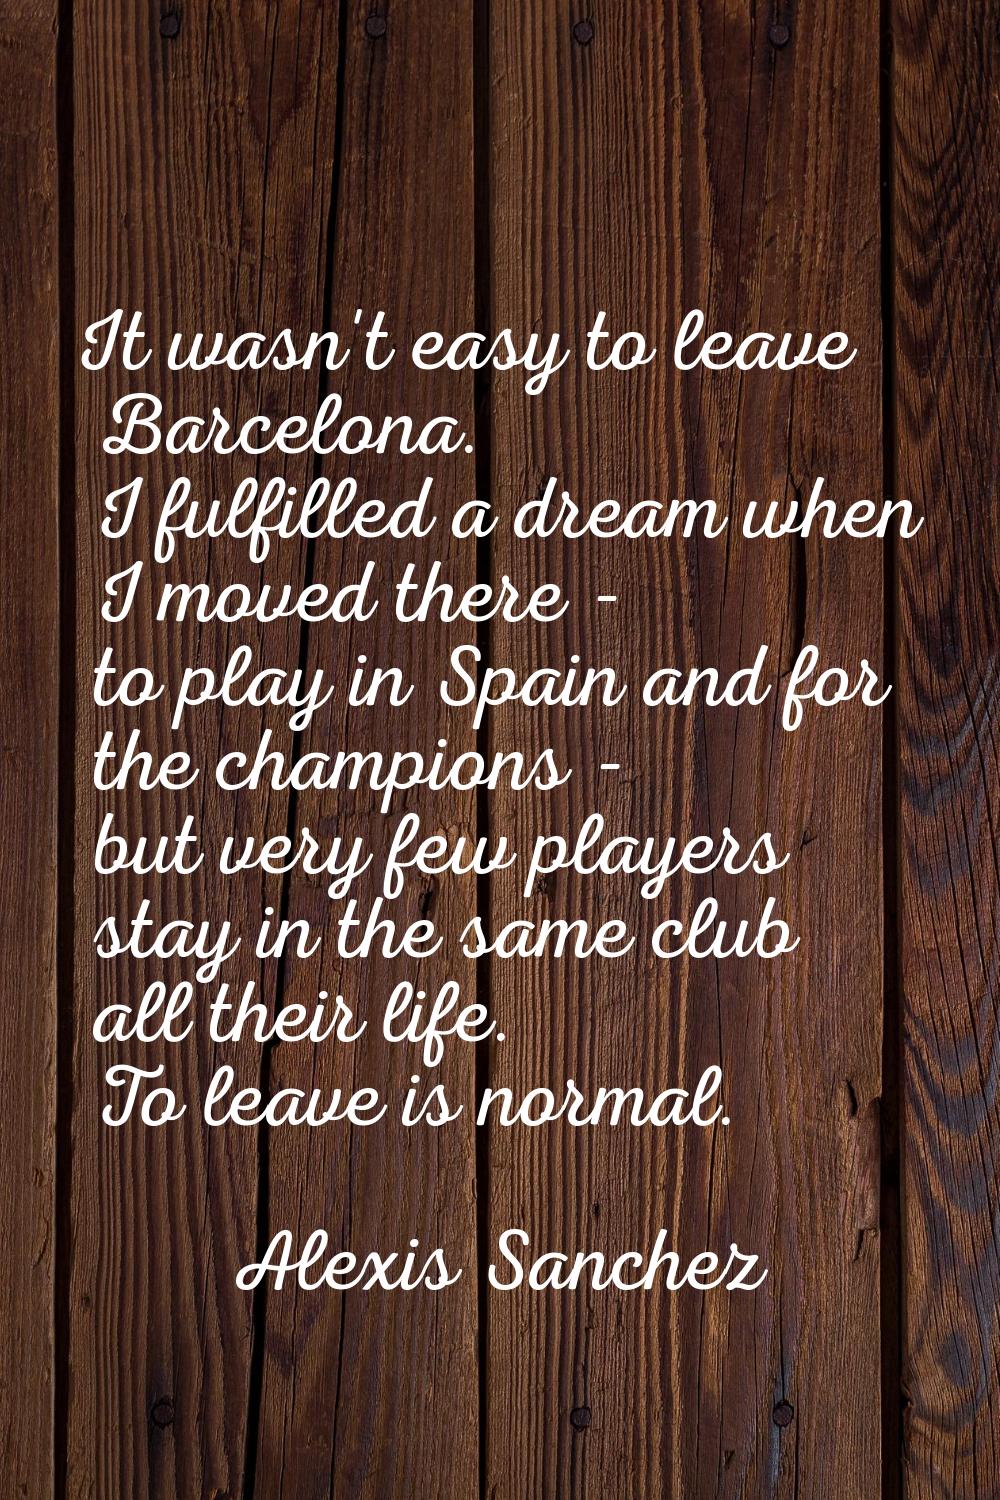 It wasn't easy to leave Barcelona. I fulfilled a dream when I moved there - to play in Spain and fo